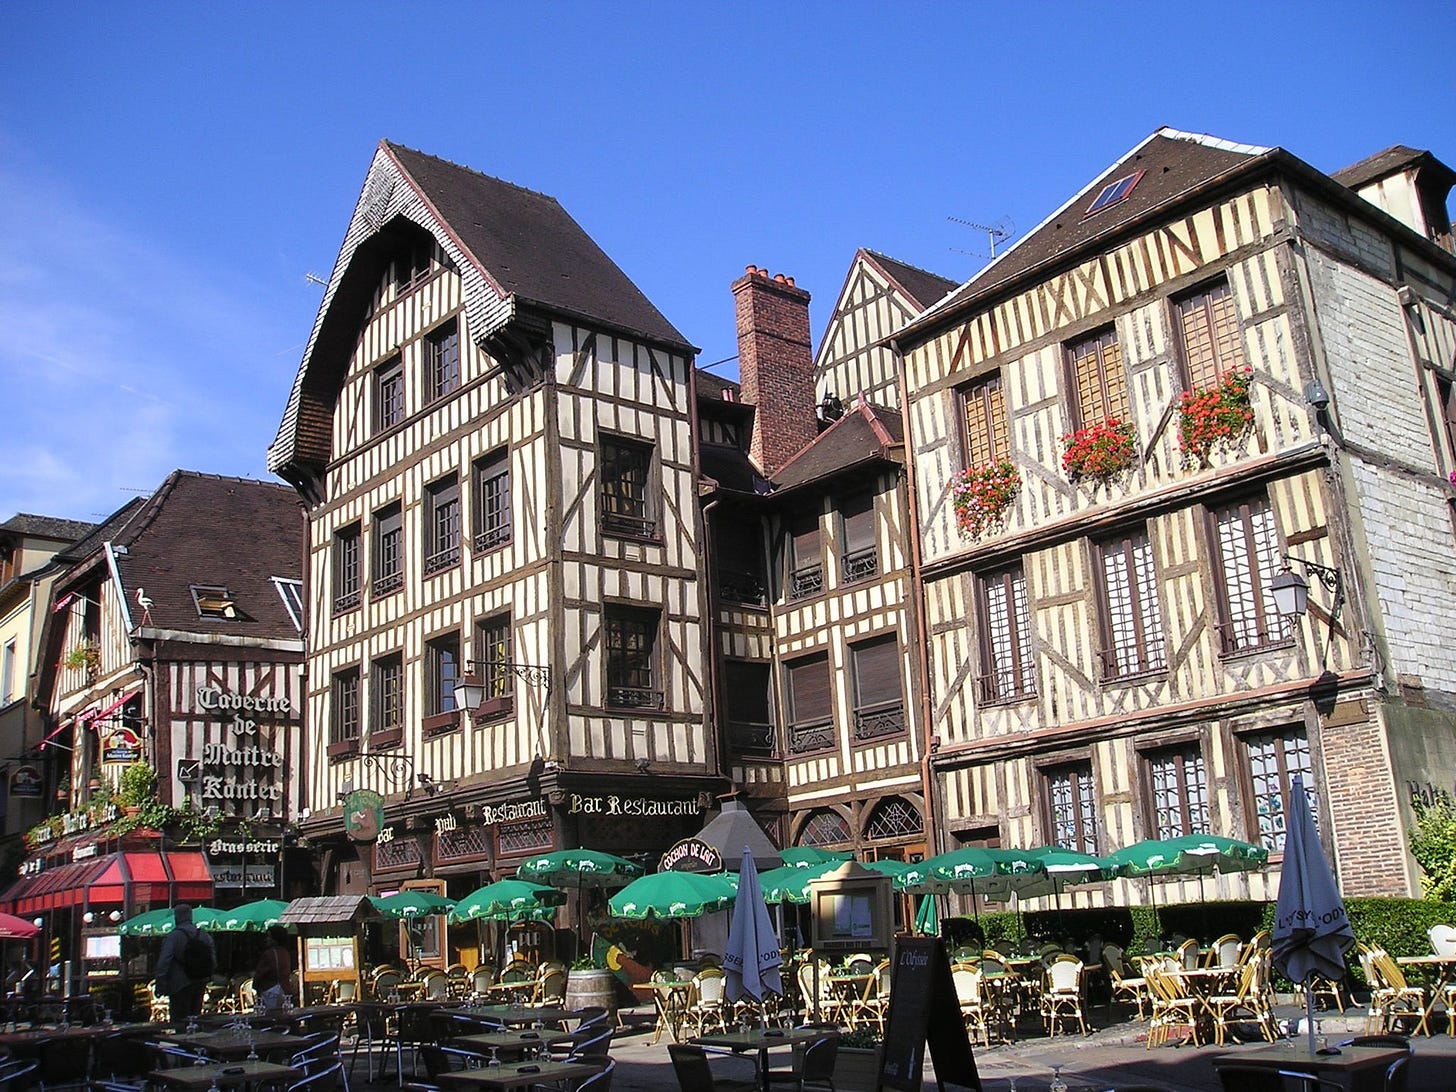 Buildings in the historic quarter of Troyes